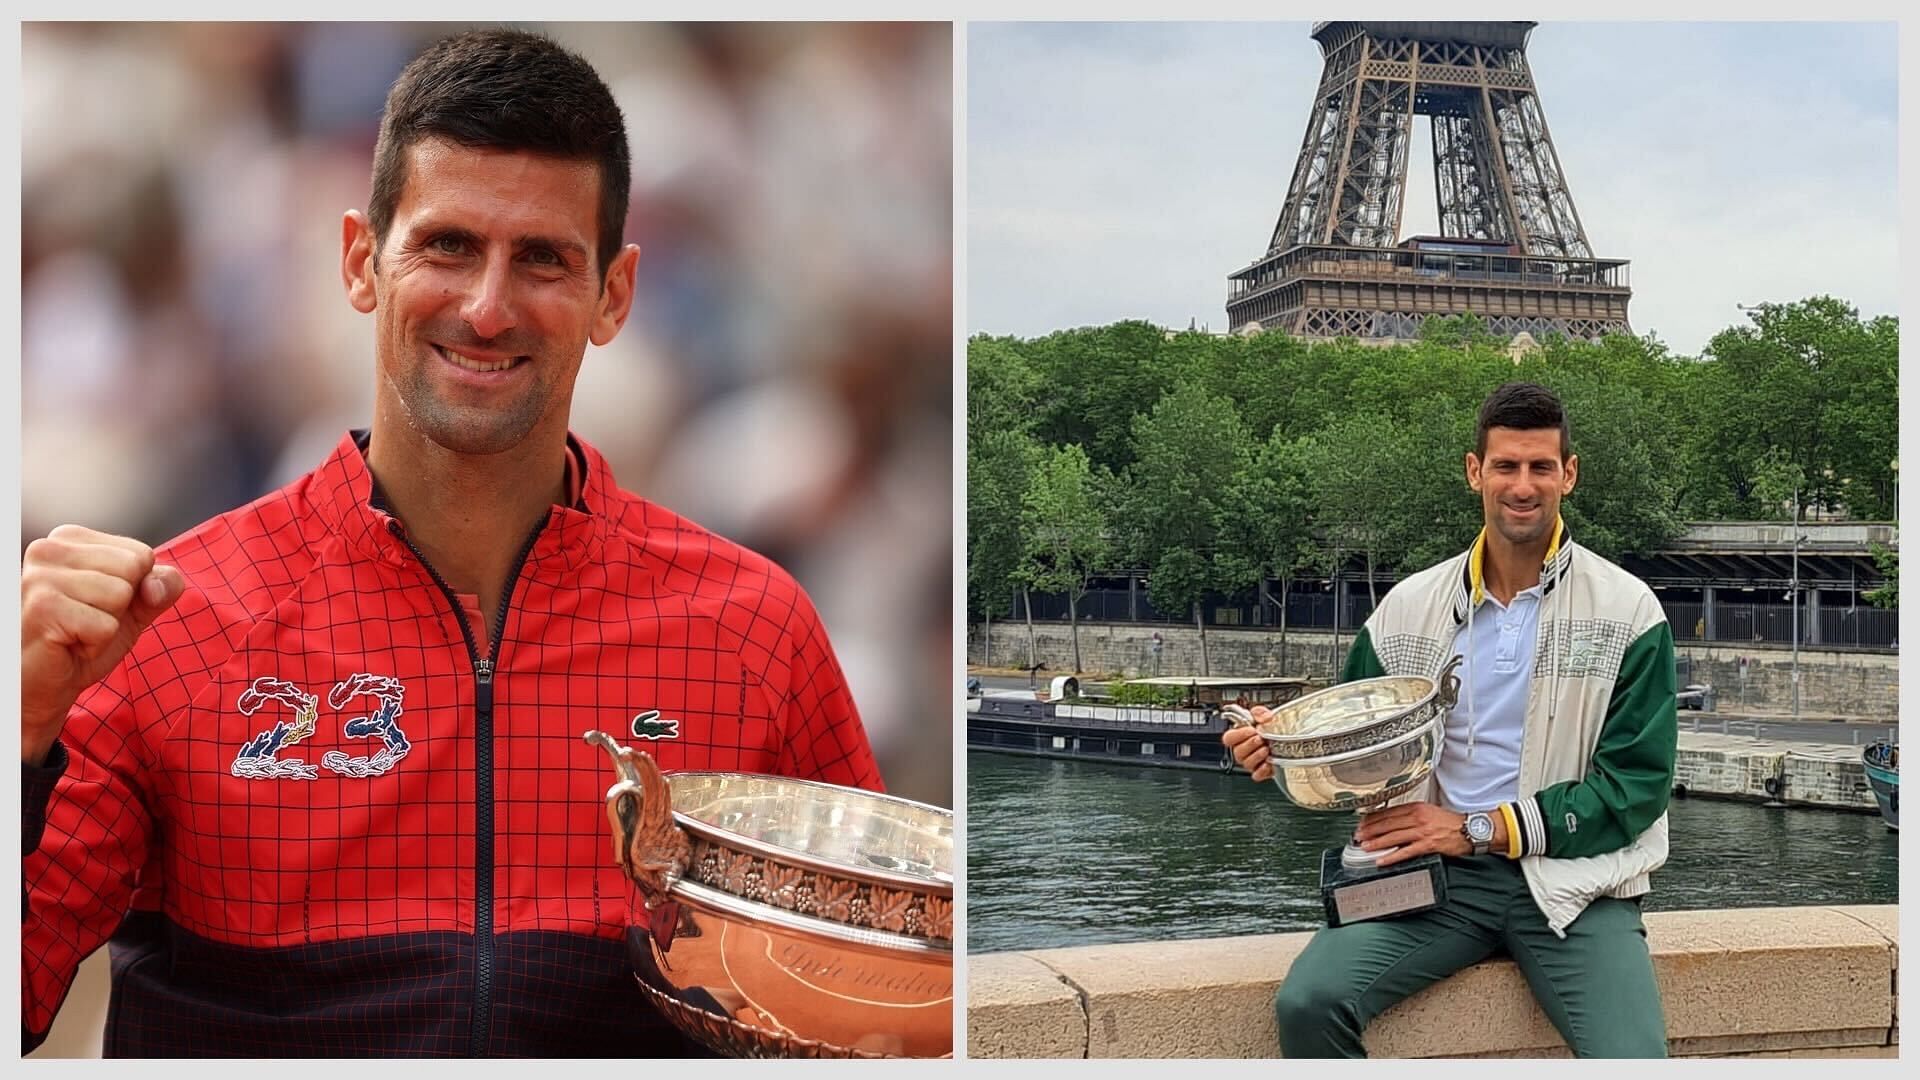 Djokovic with the French Open winner